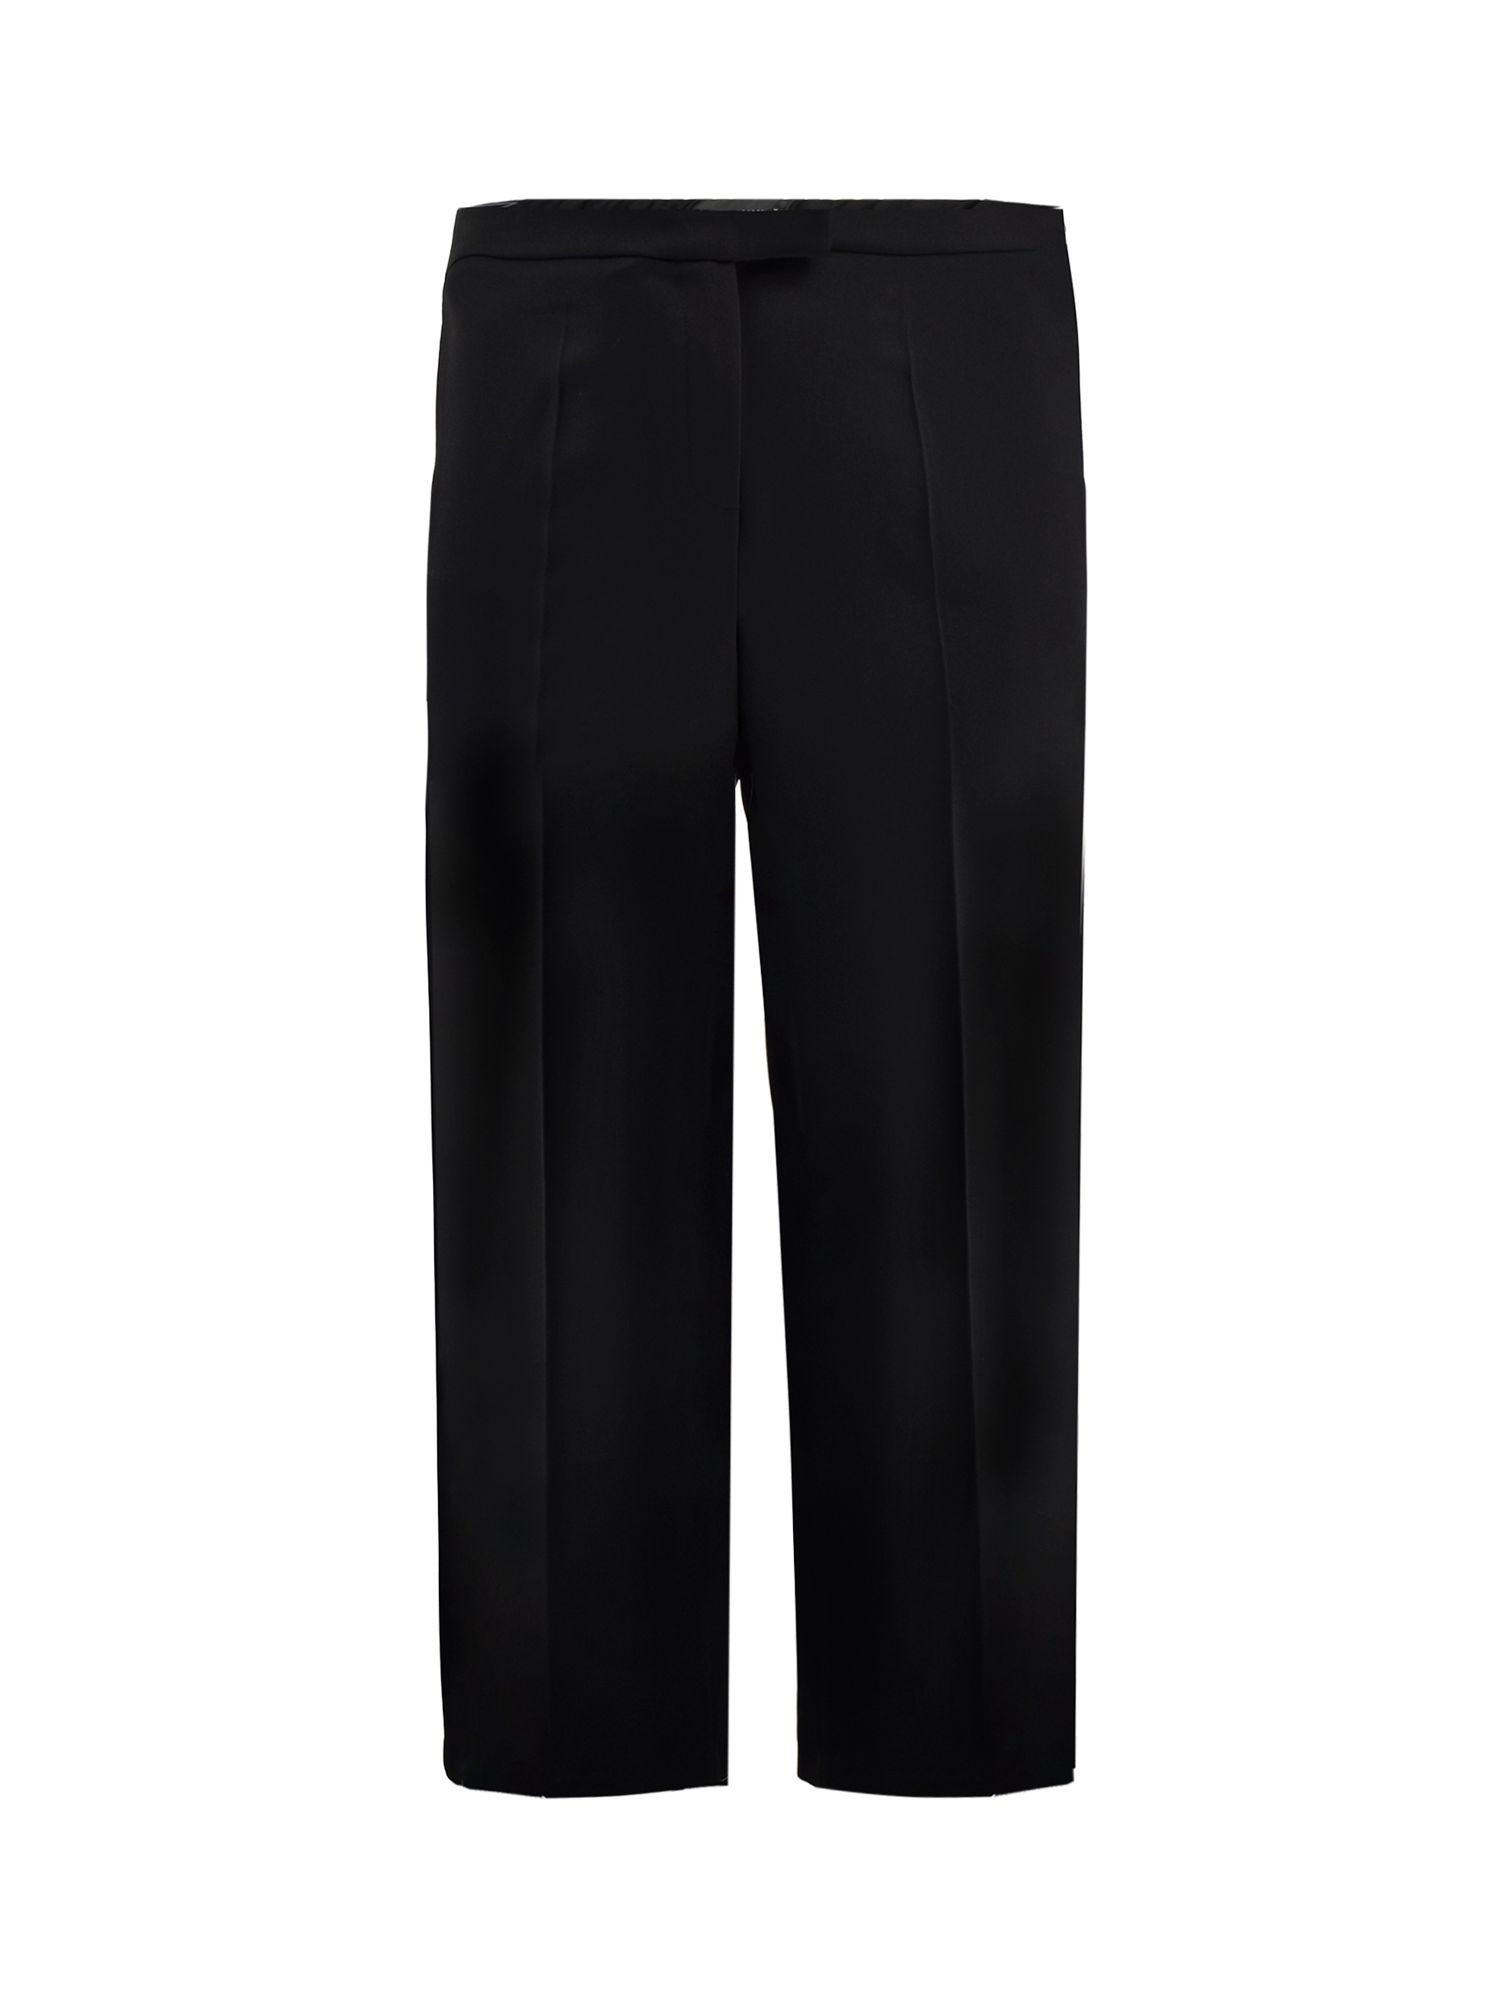 Live Unlimited Tapered Trousers, Black at John Lewis & Partners